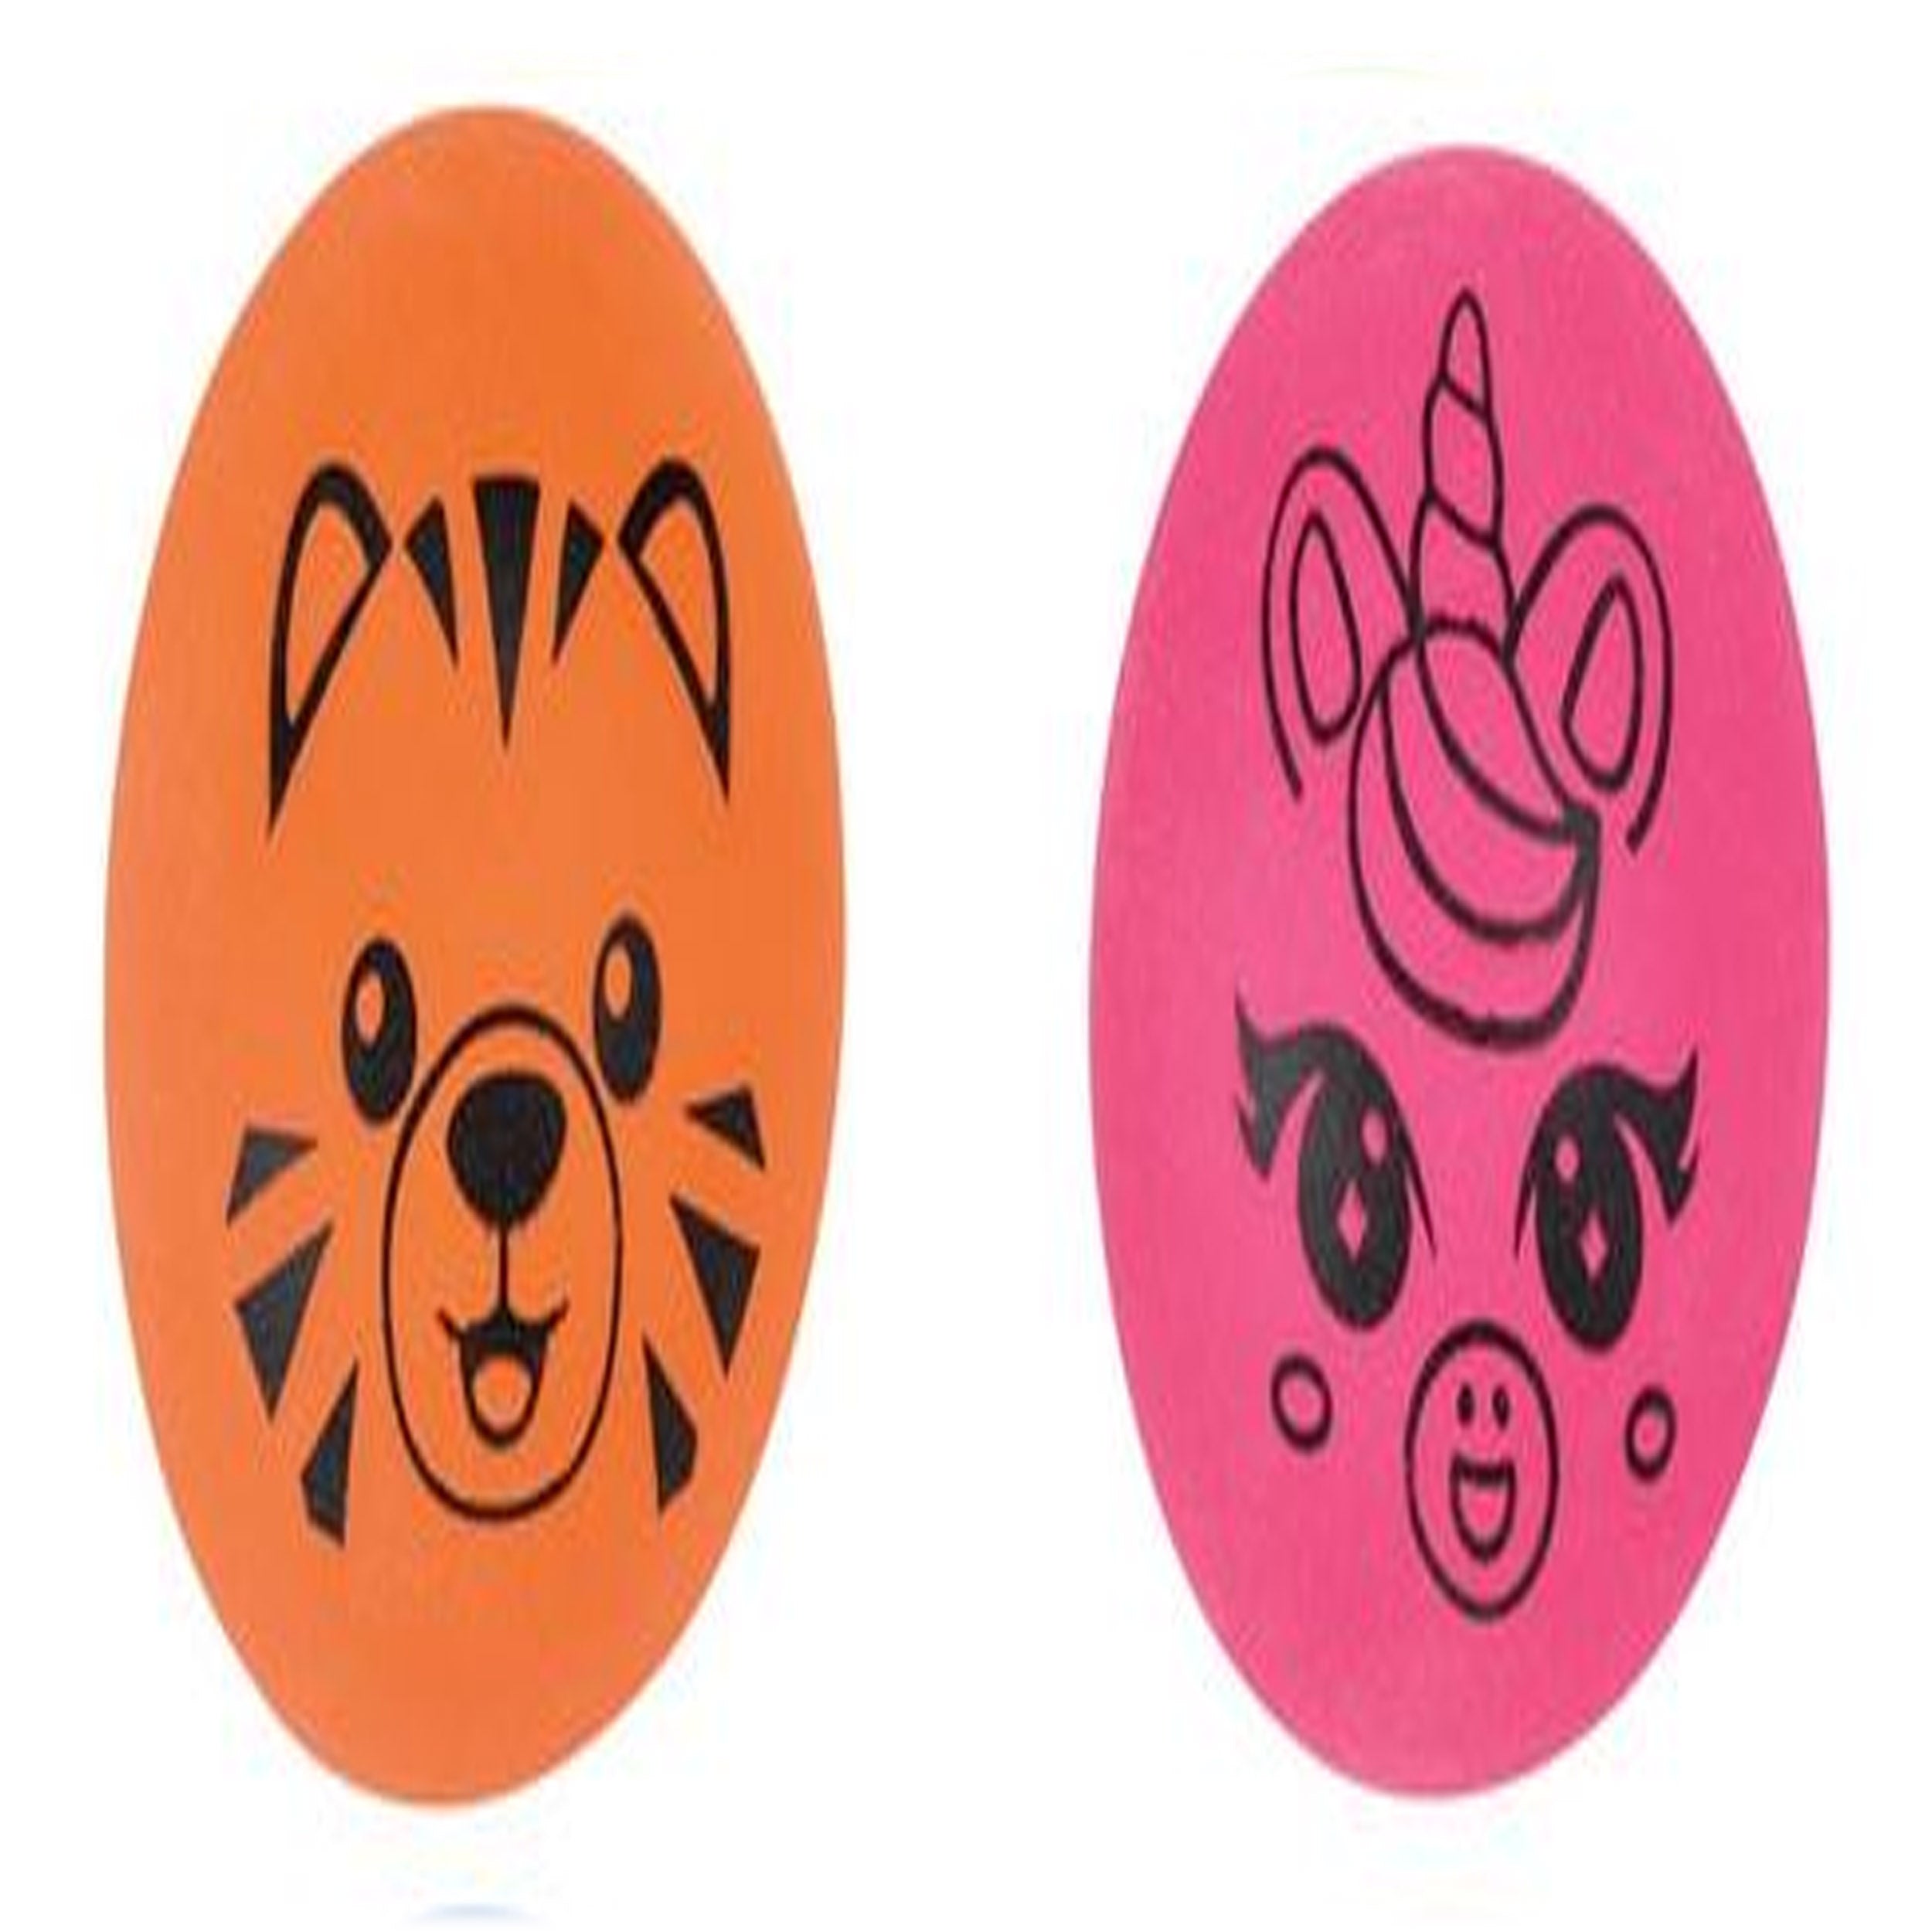 Squeezy Animal Faces Ball Soft and Stretchy Balls Assorted Colors MOQ-12